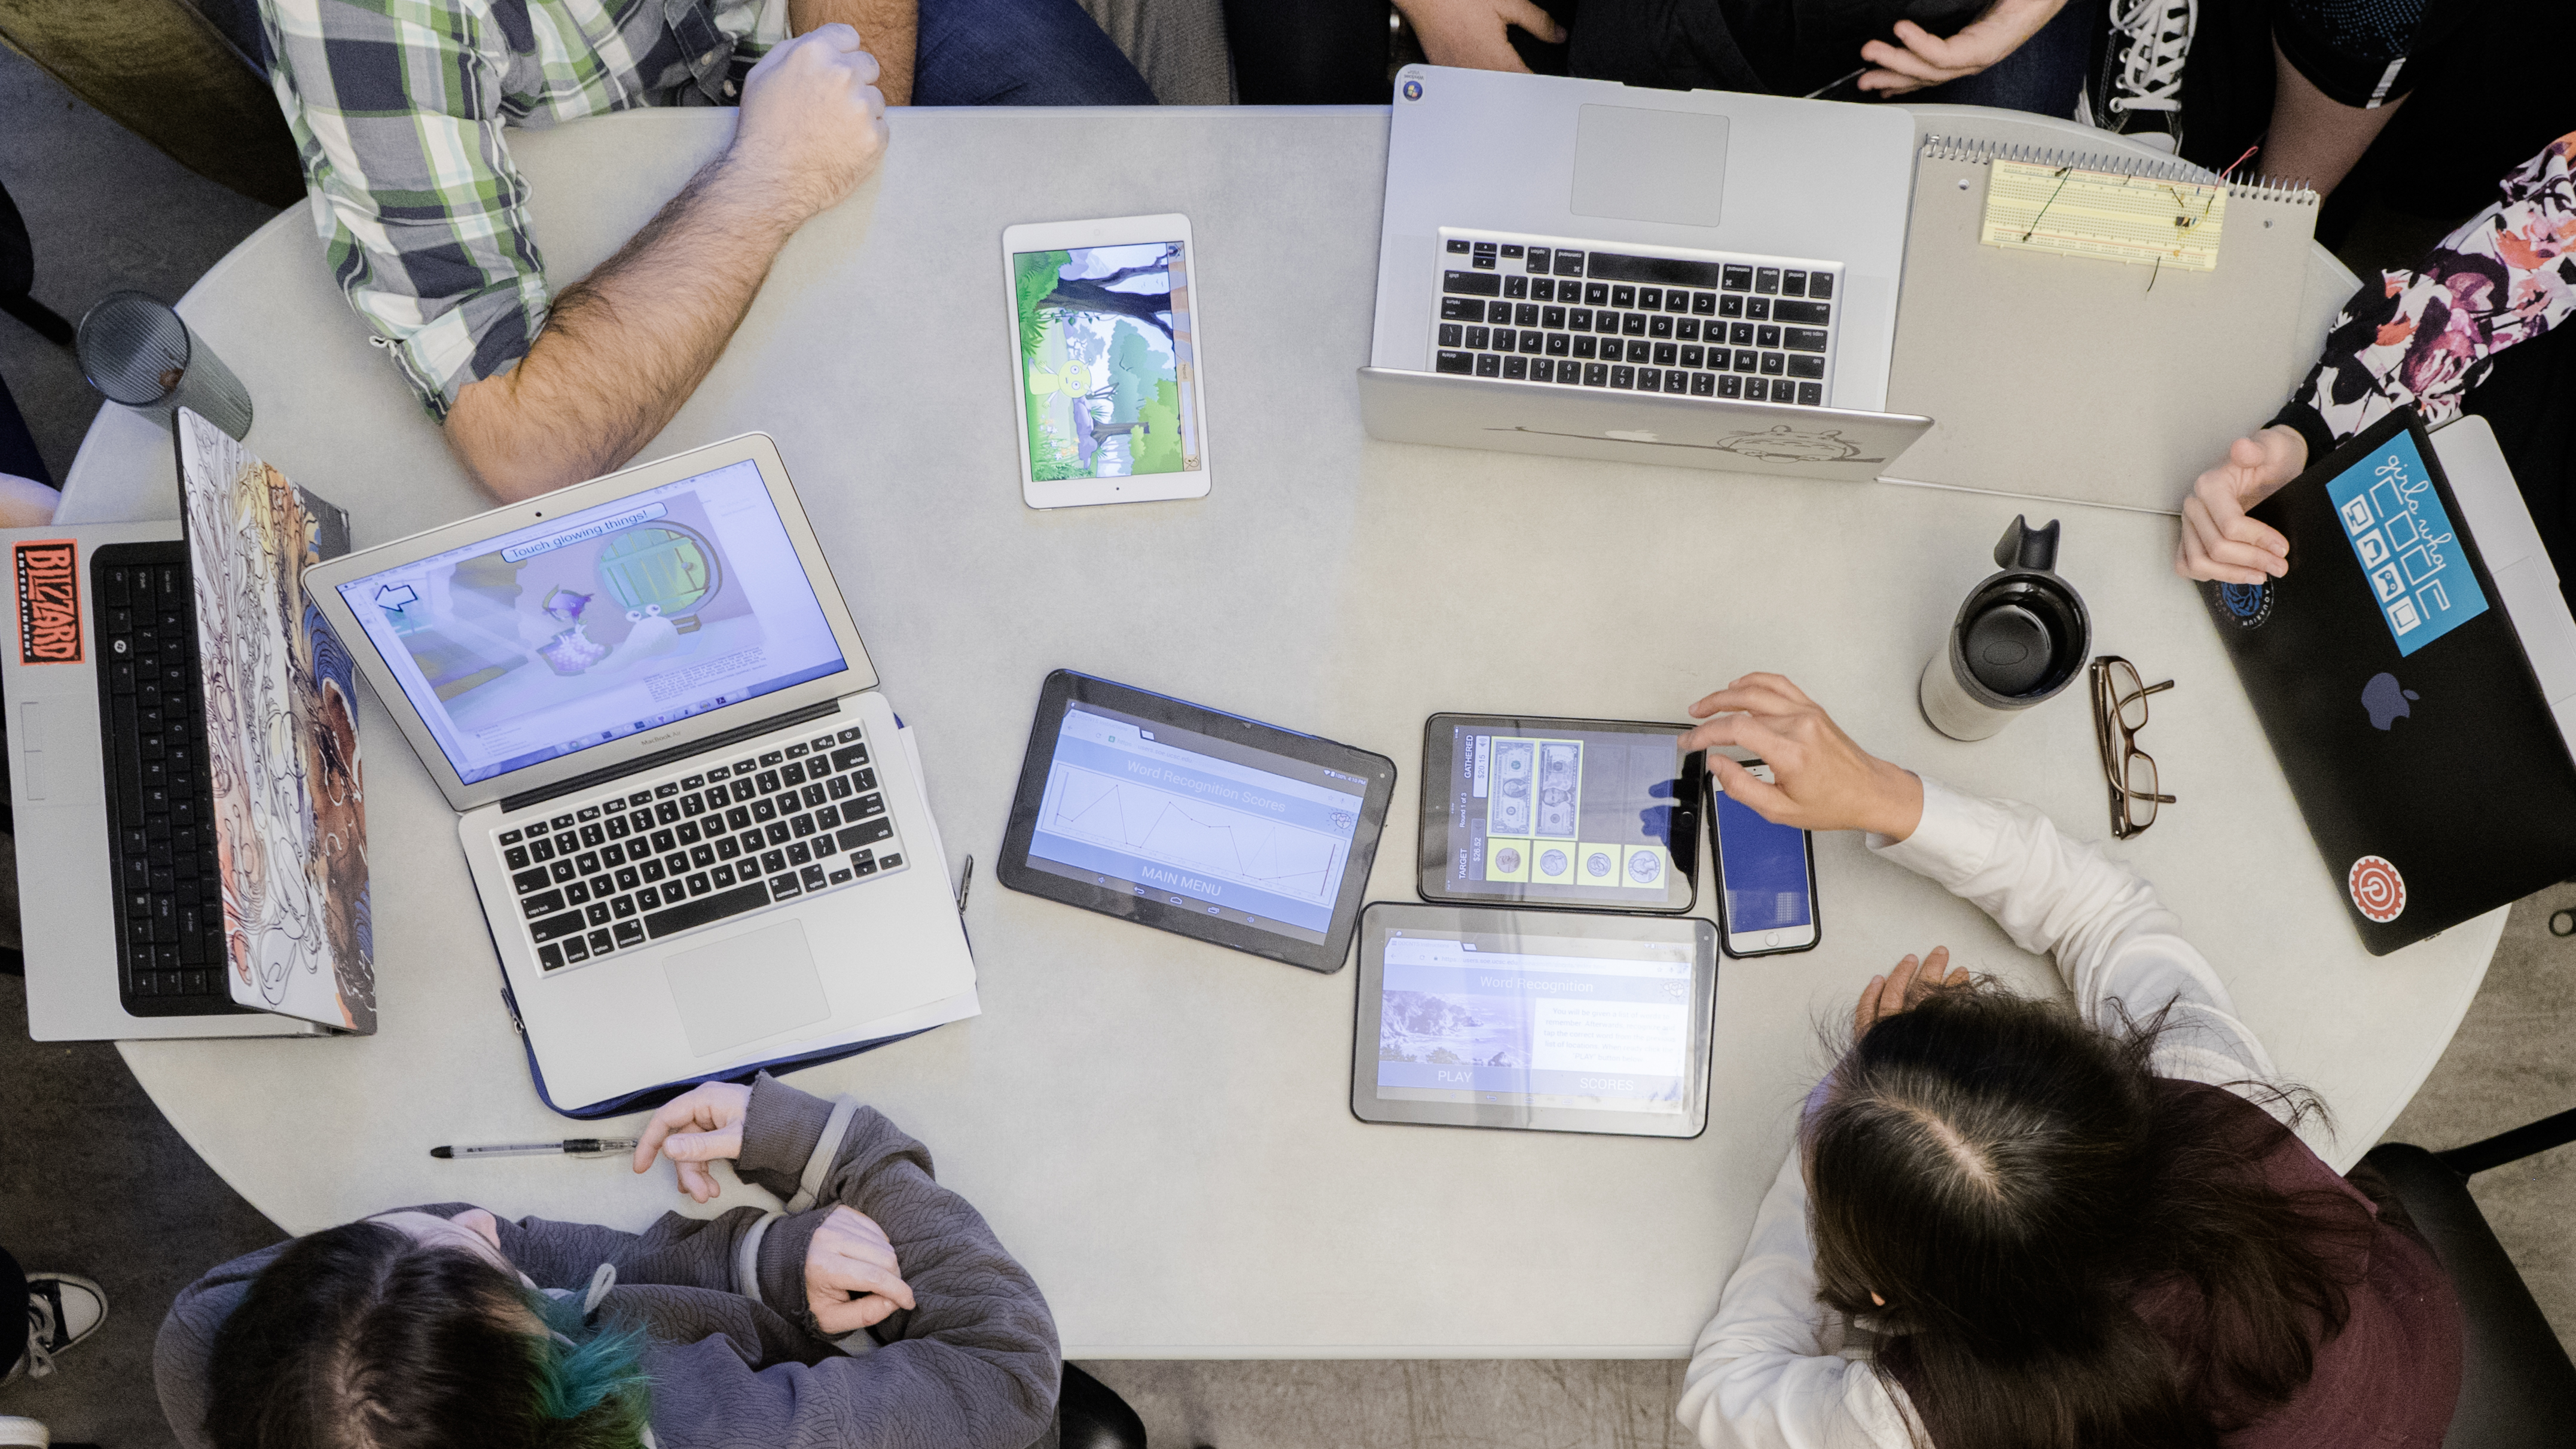 photo from above of a table with students working together on their laptops